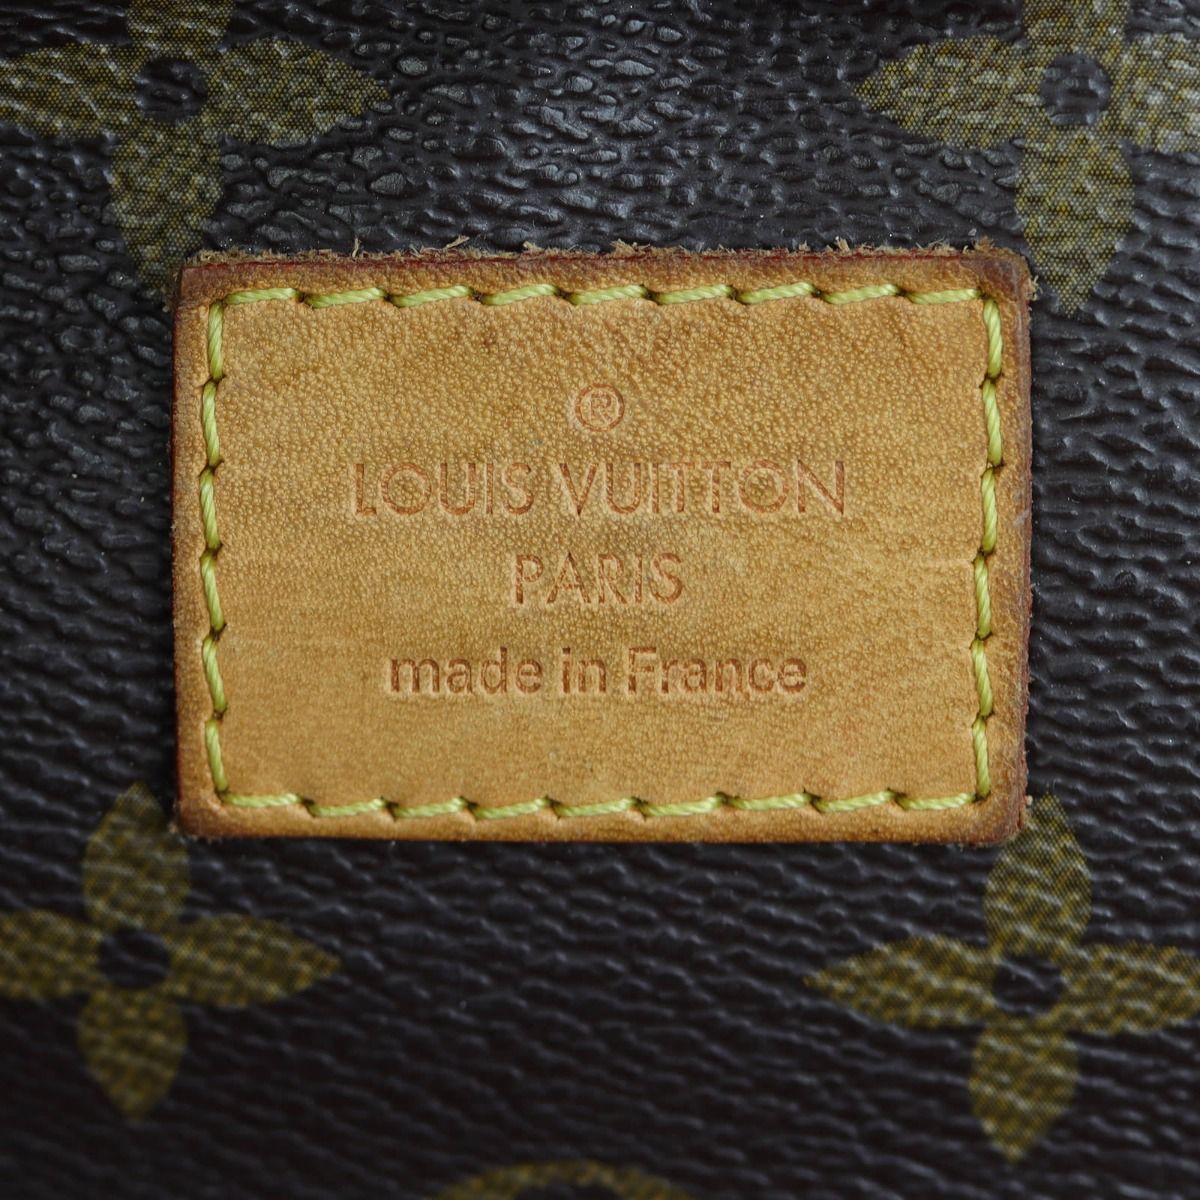 Naughtipidgins Nest - New Louis Vuitton Sully MM in Monogram. Soon to be  replaced by LV by the Berri hobo, the Sully MM blends vintage-inspired  detail and an elegant contemporary shape. With